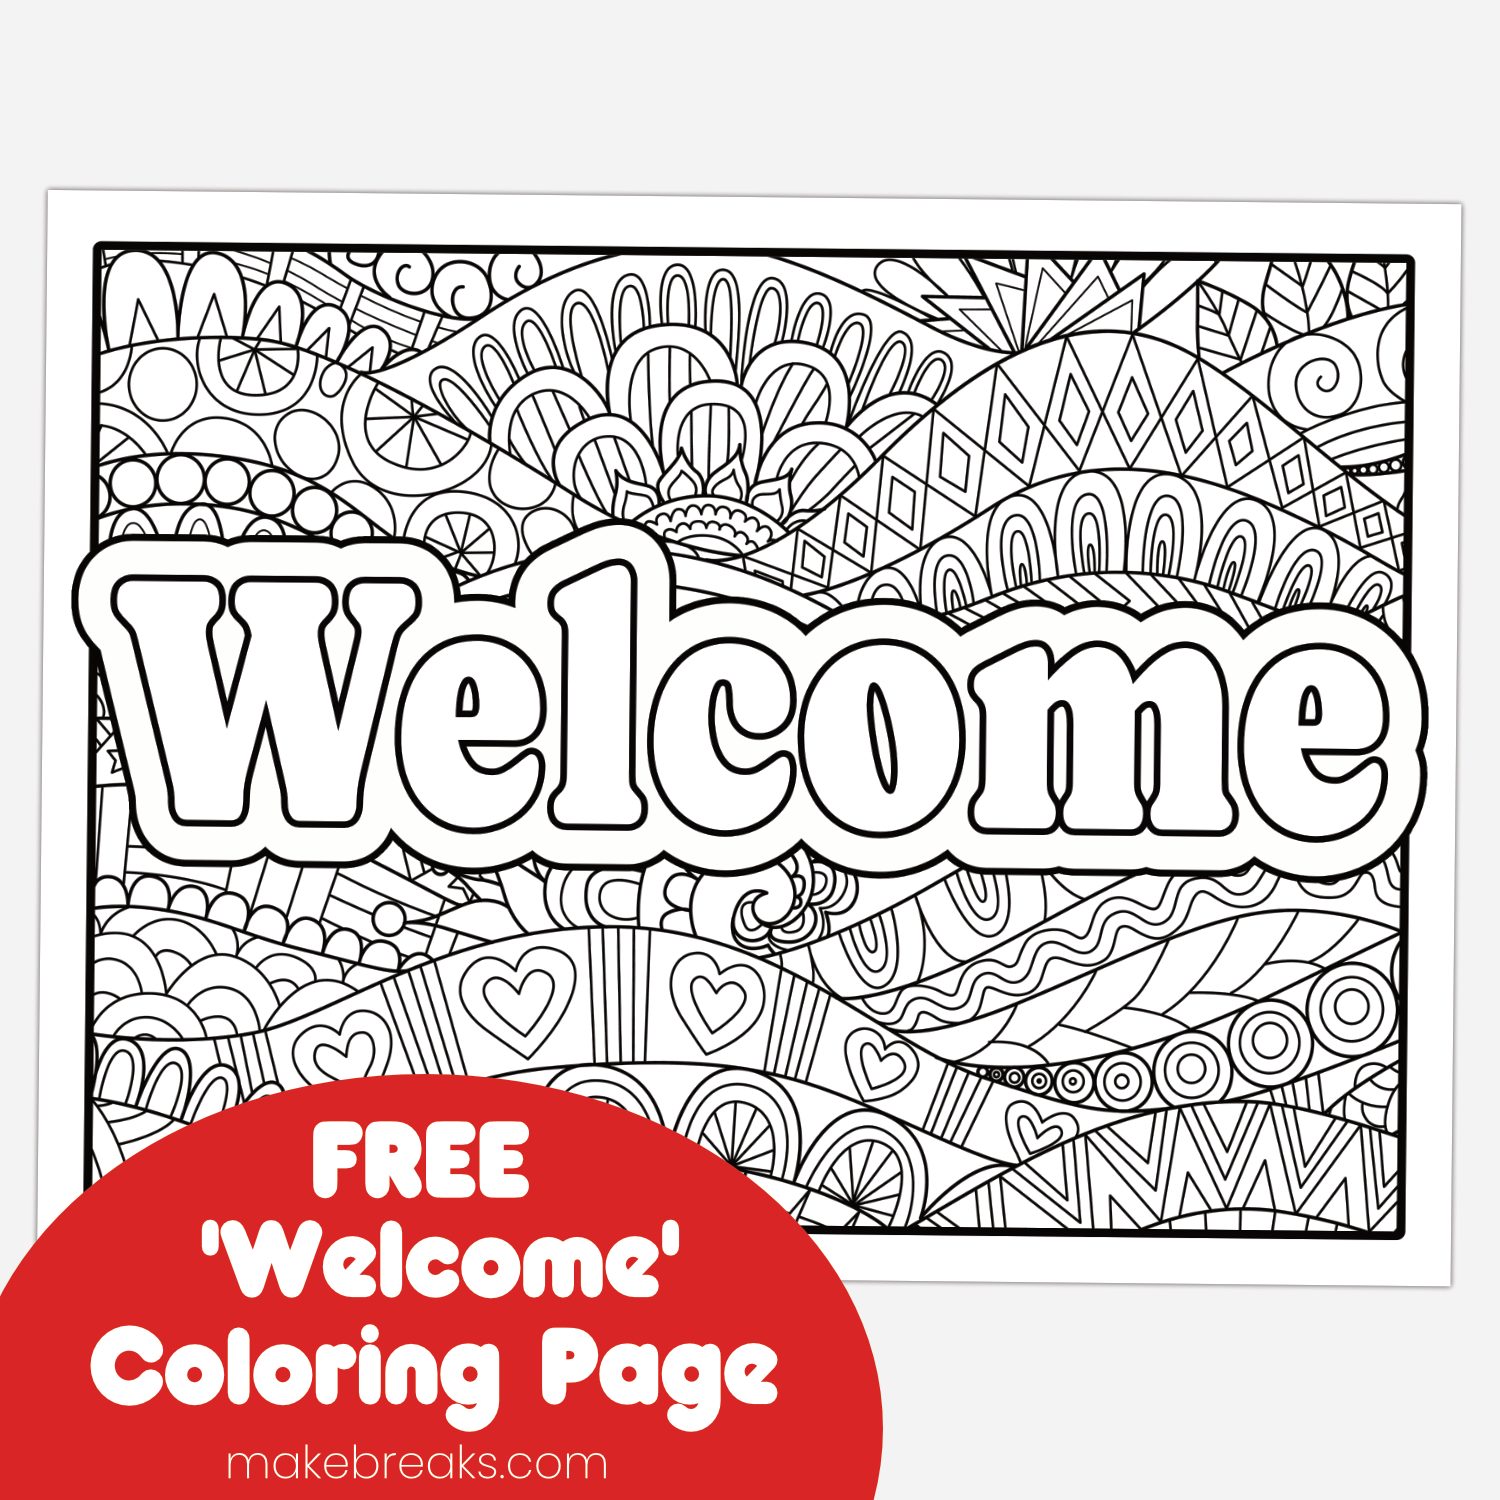 Image About Coloring Page - Coloring Home Pages in 2023